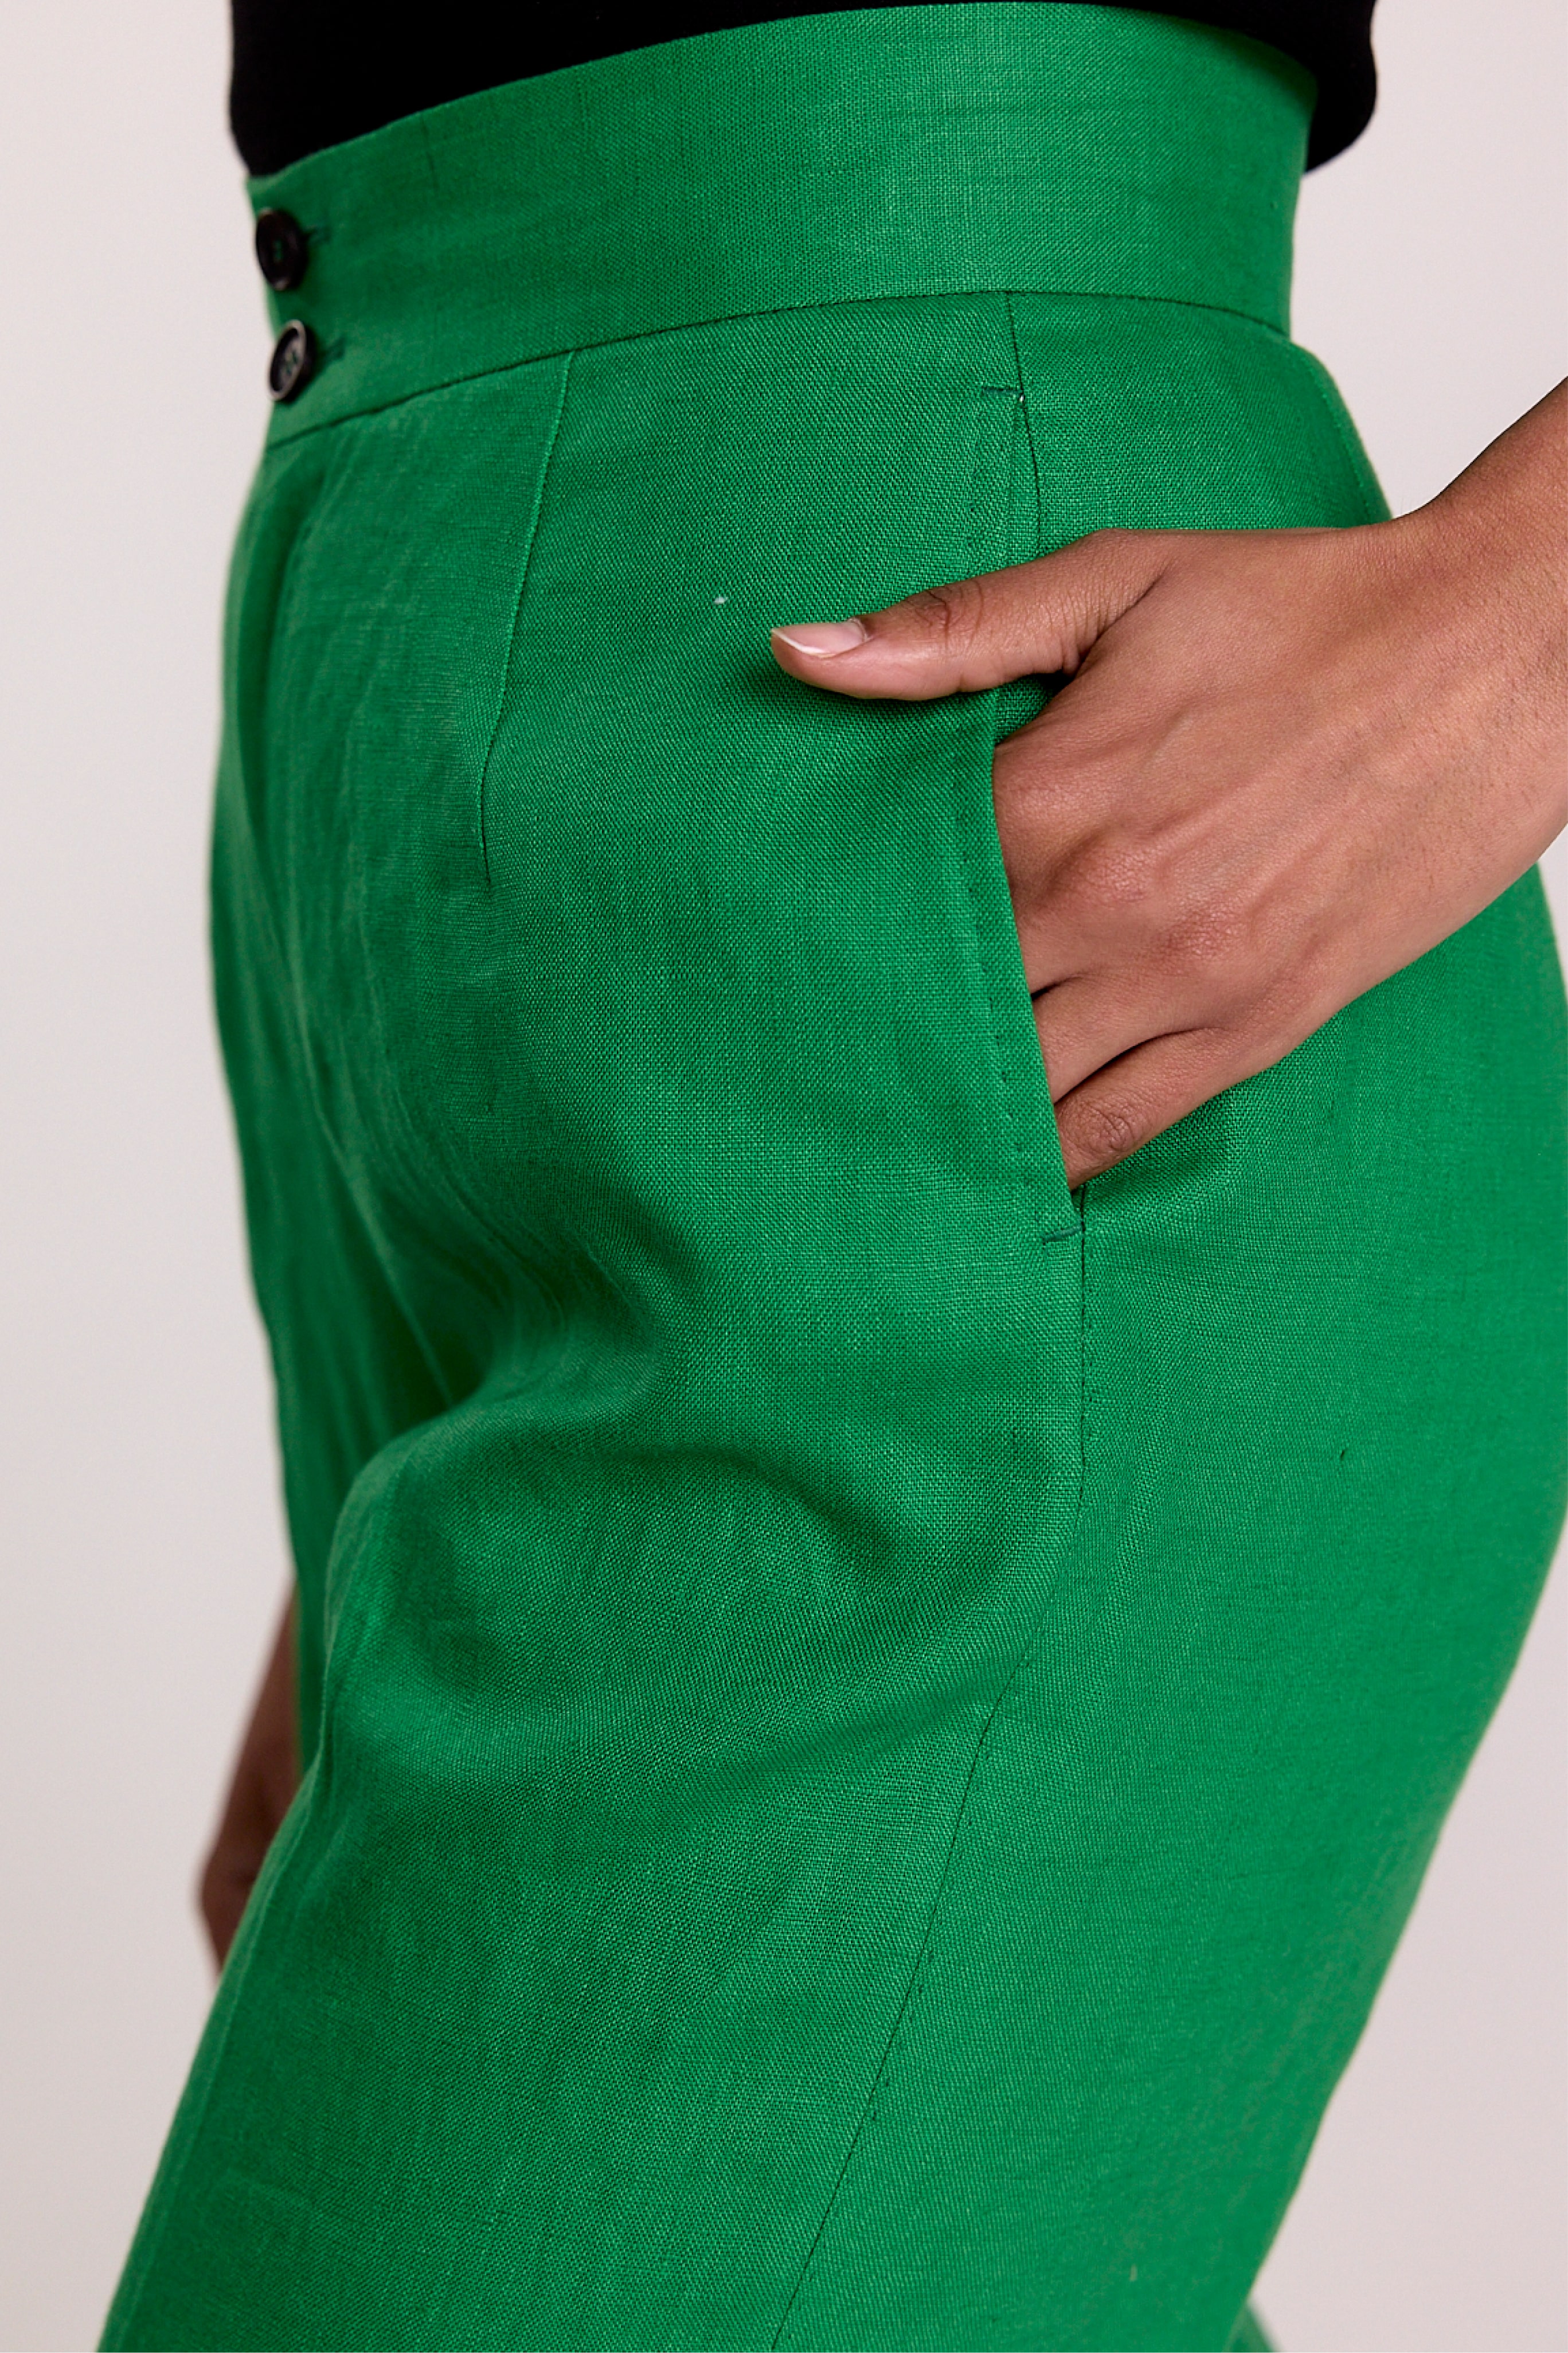 Unisex Emerald Green Pants for Women, Custom Made Baggy Linen Pant,  Bohemian Pants, Made to Order, Plus Size -  Canada